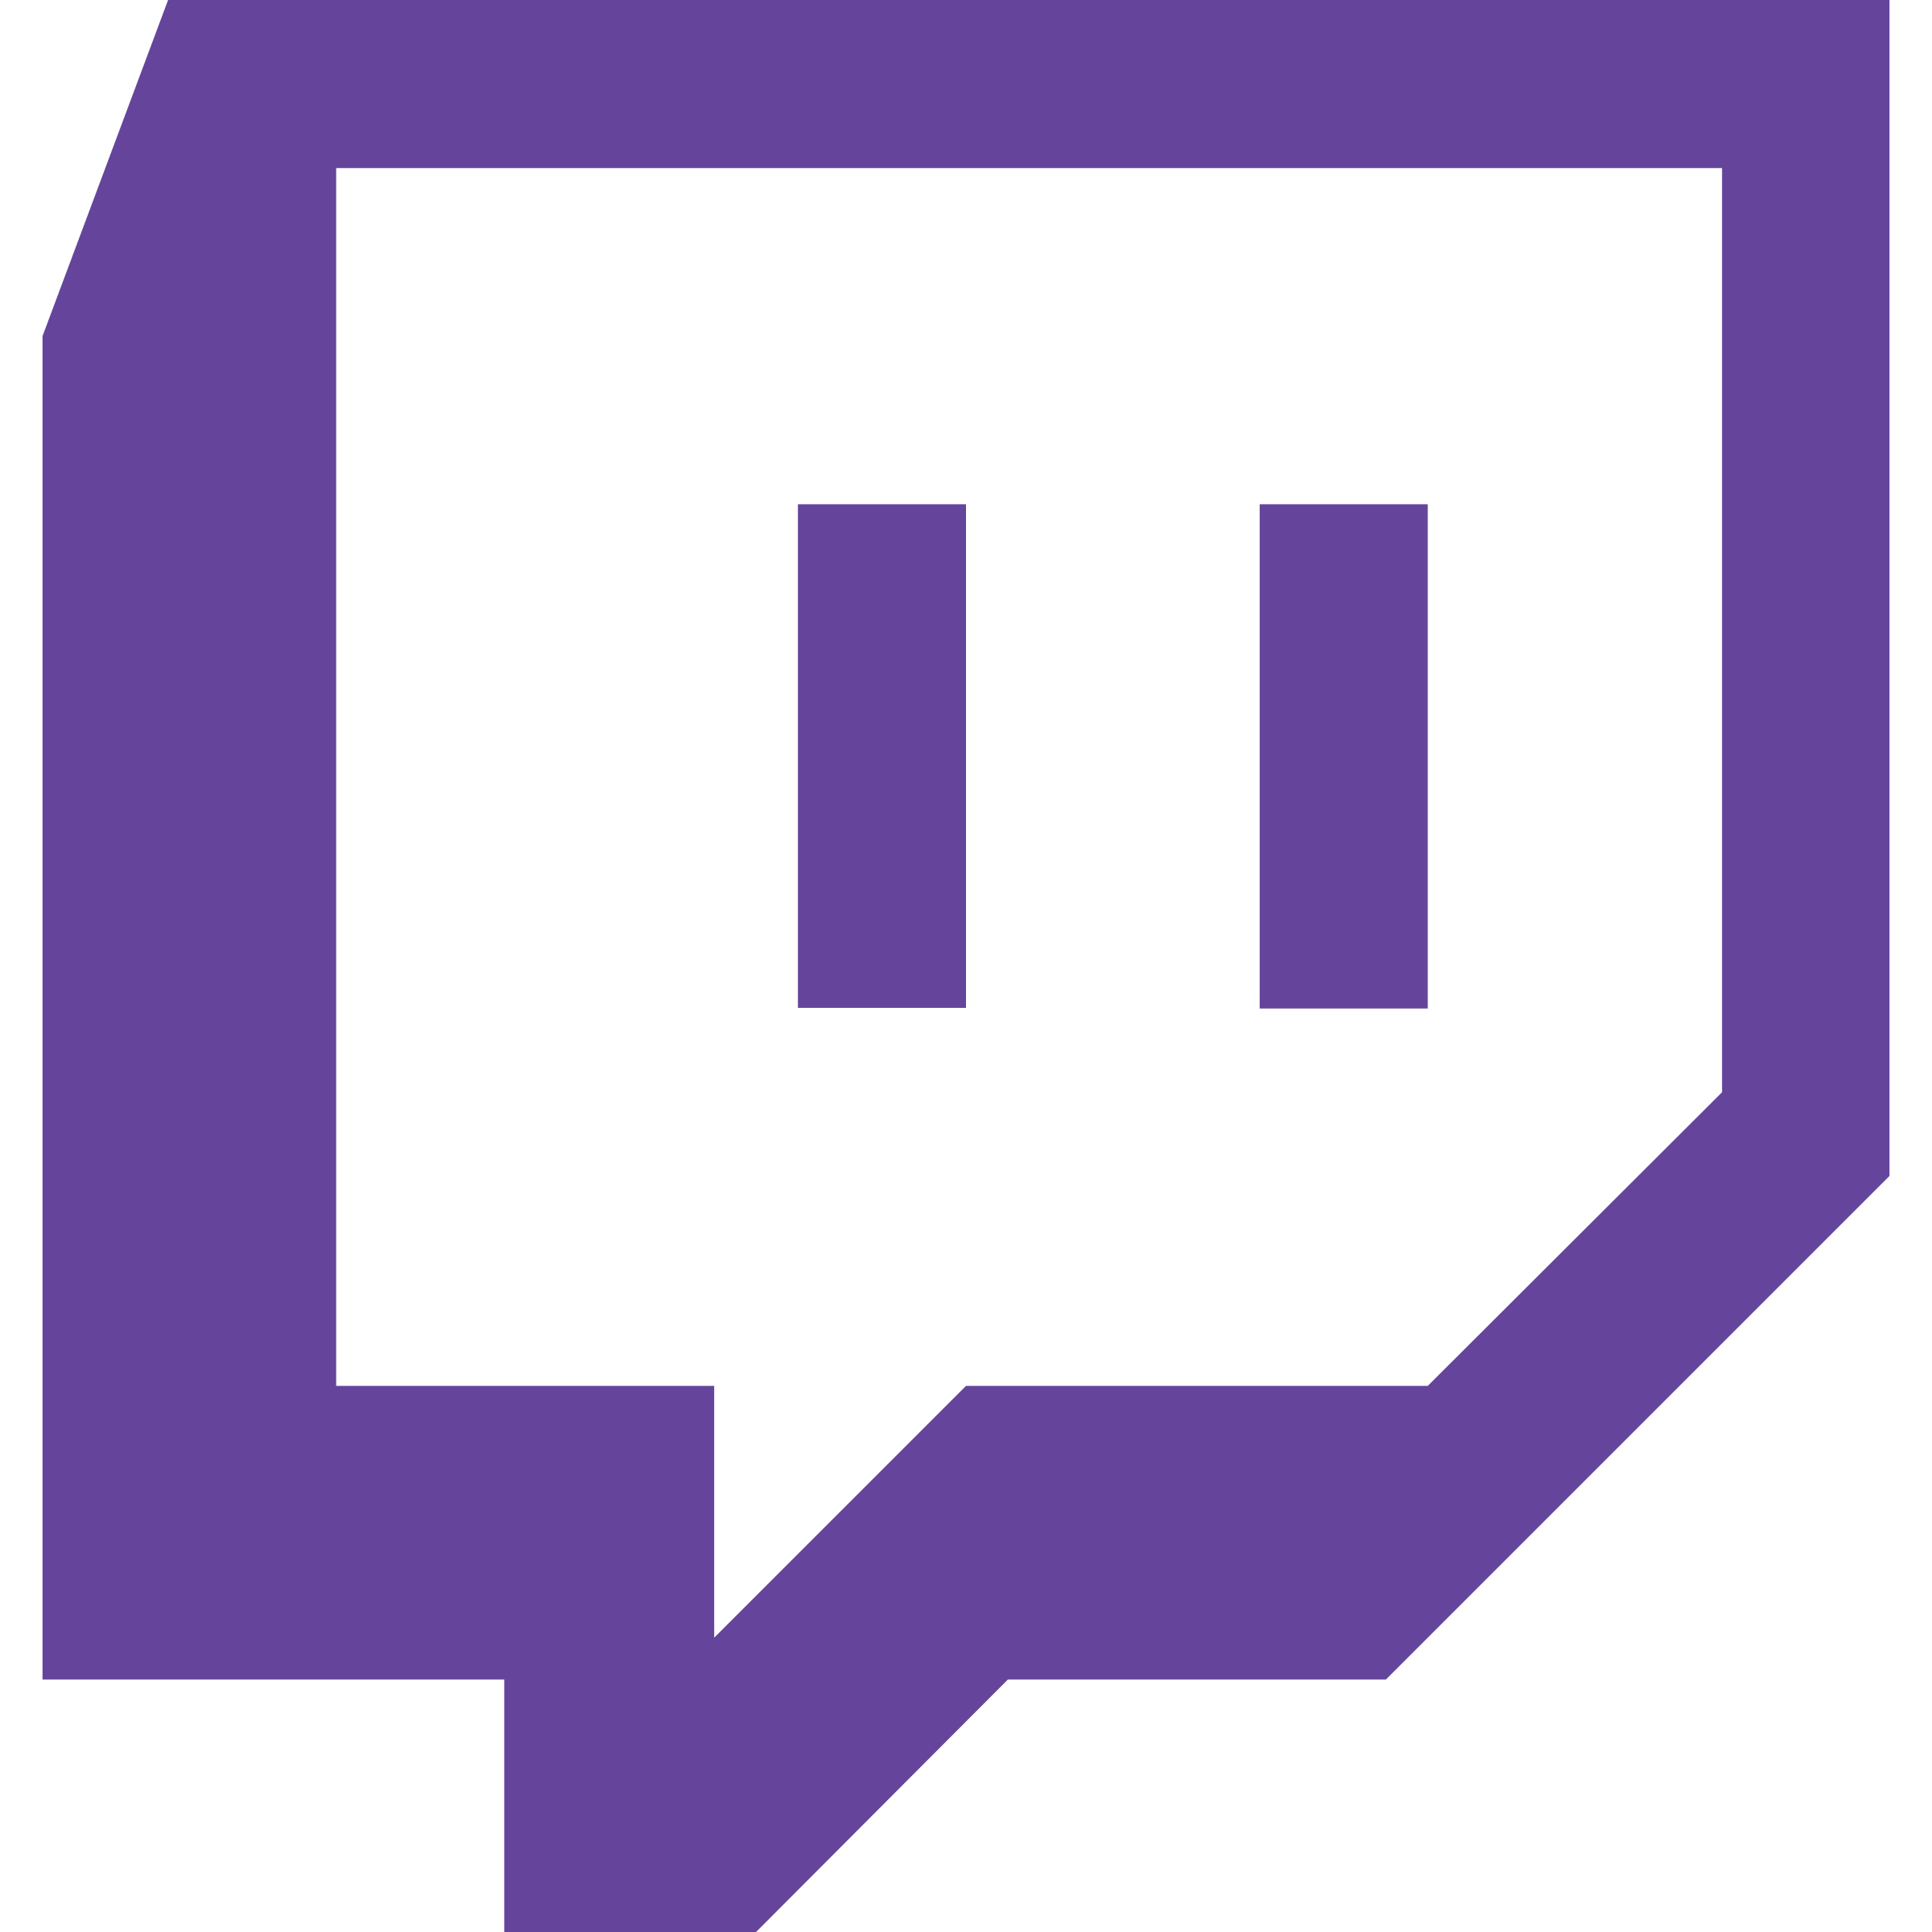 Twitch - Save Up to 90% Off on Streaming Services